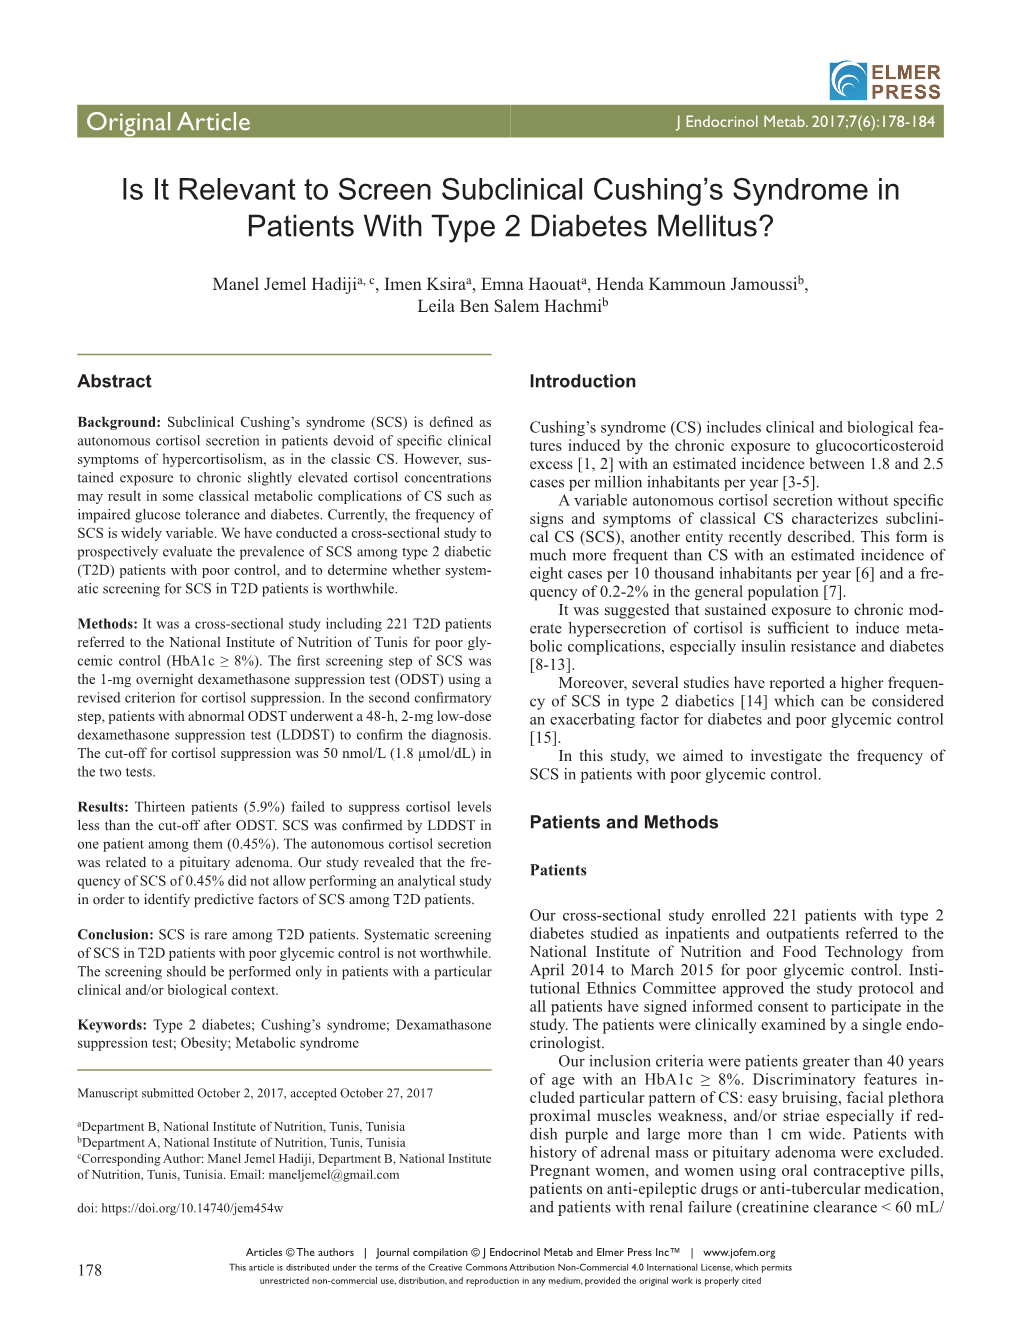 Is It Relevant to Screen Subclinical Cushing's Syndrome in Patients